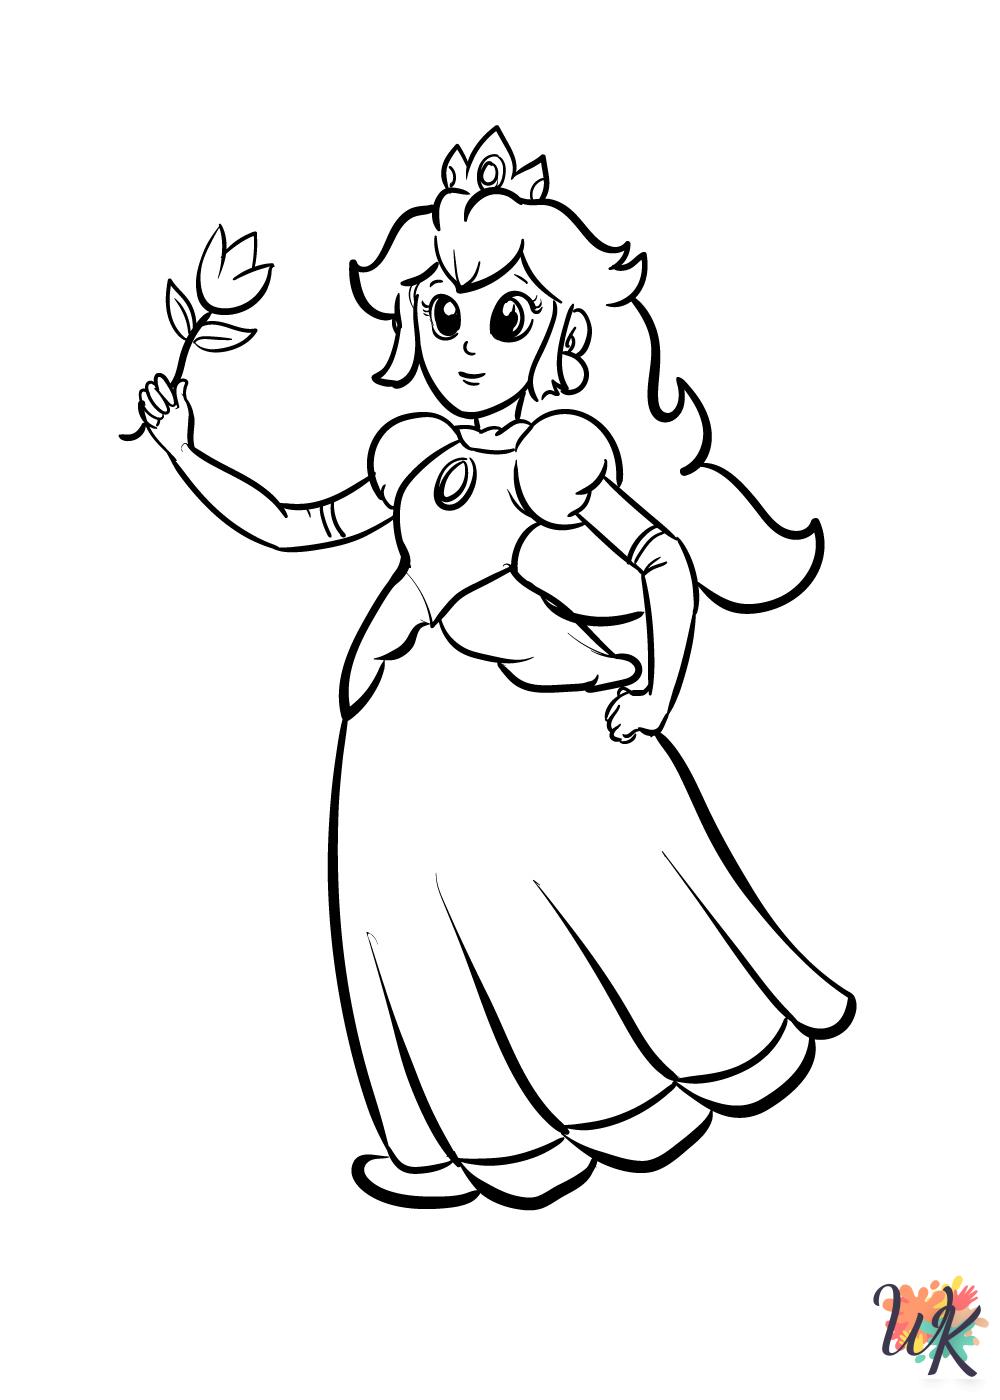 Princess Peach coloring pages free